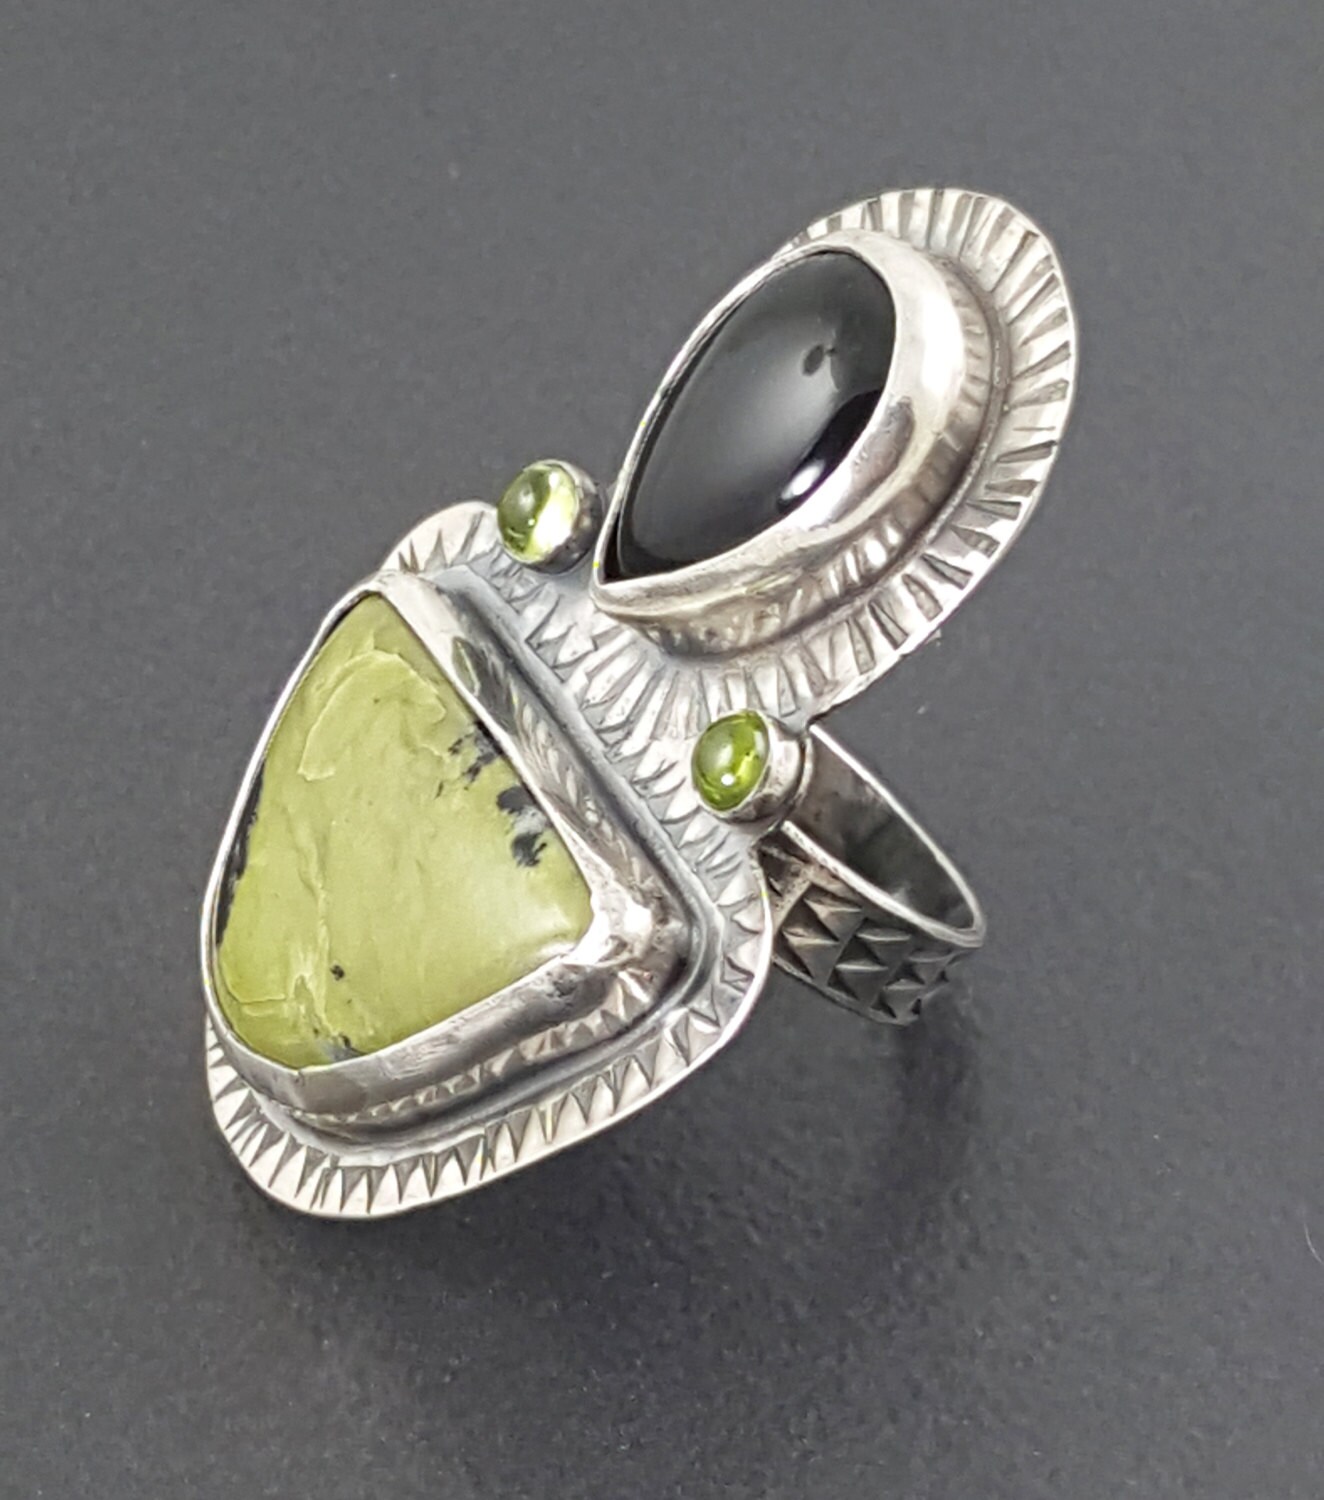 Black Onyx and Serpentine Ring sterling silver size 8 ring